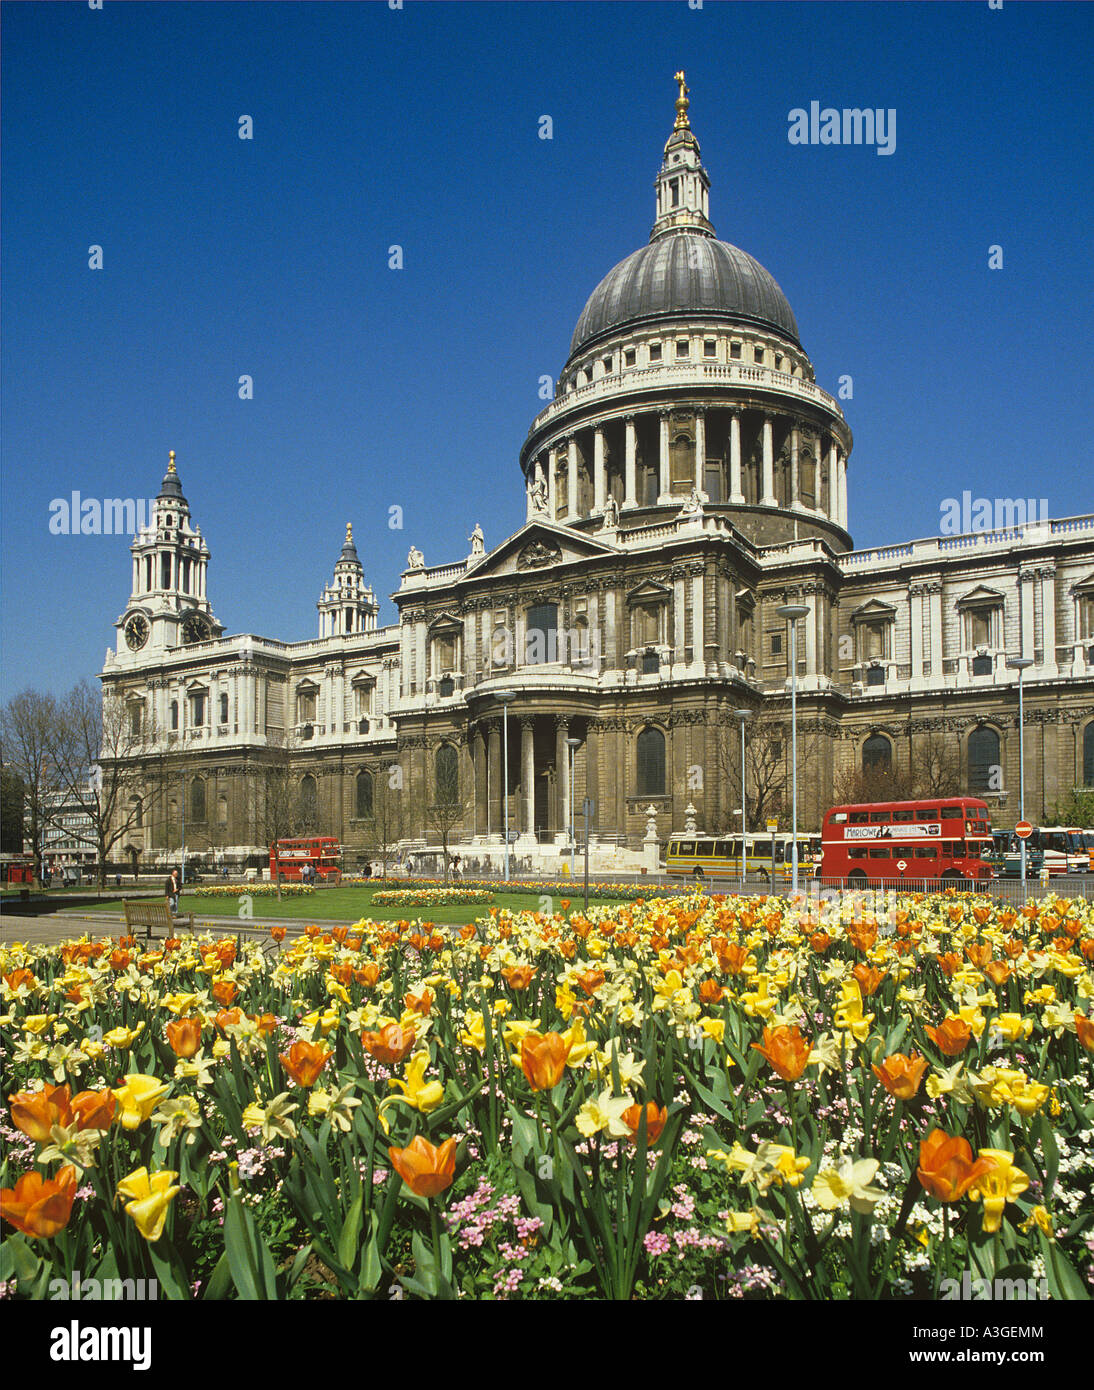 St Pauls Cathedral designed by Christopher Wren and completed in 1708 on the summit of Ludgate Hill in London Stock Photo